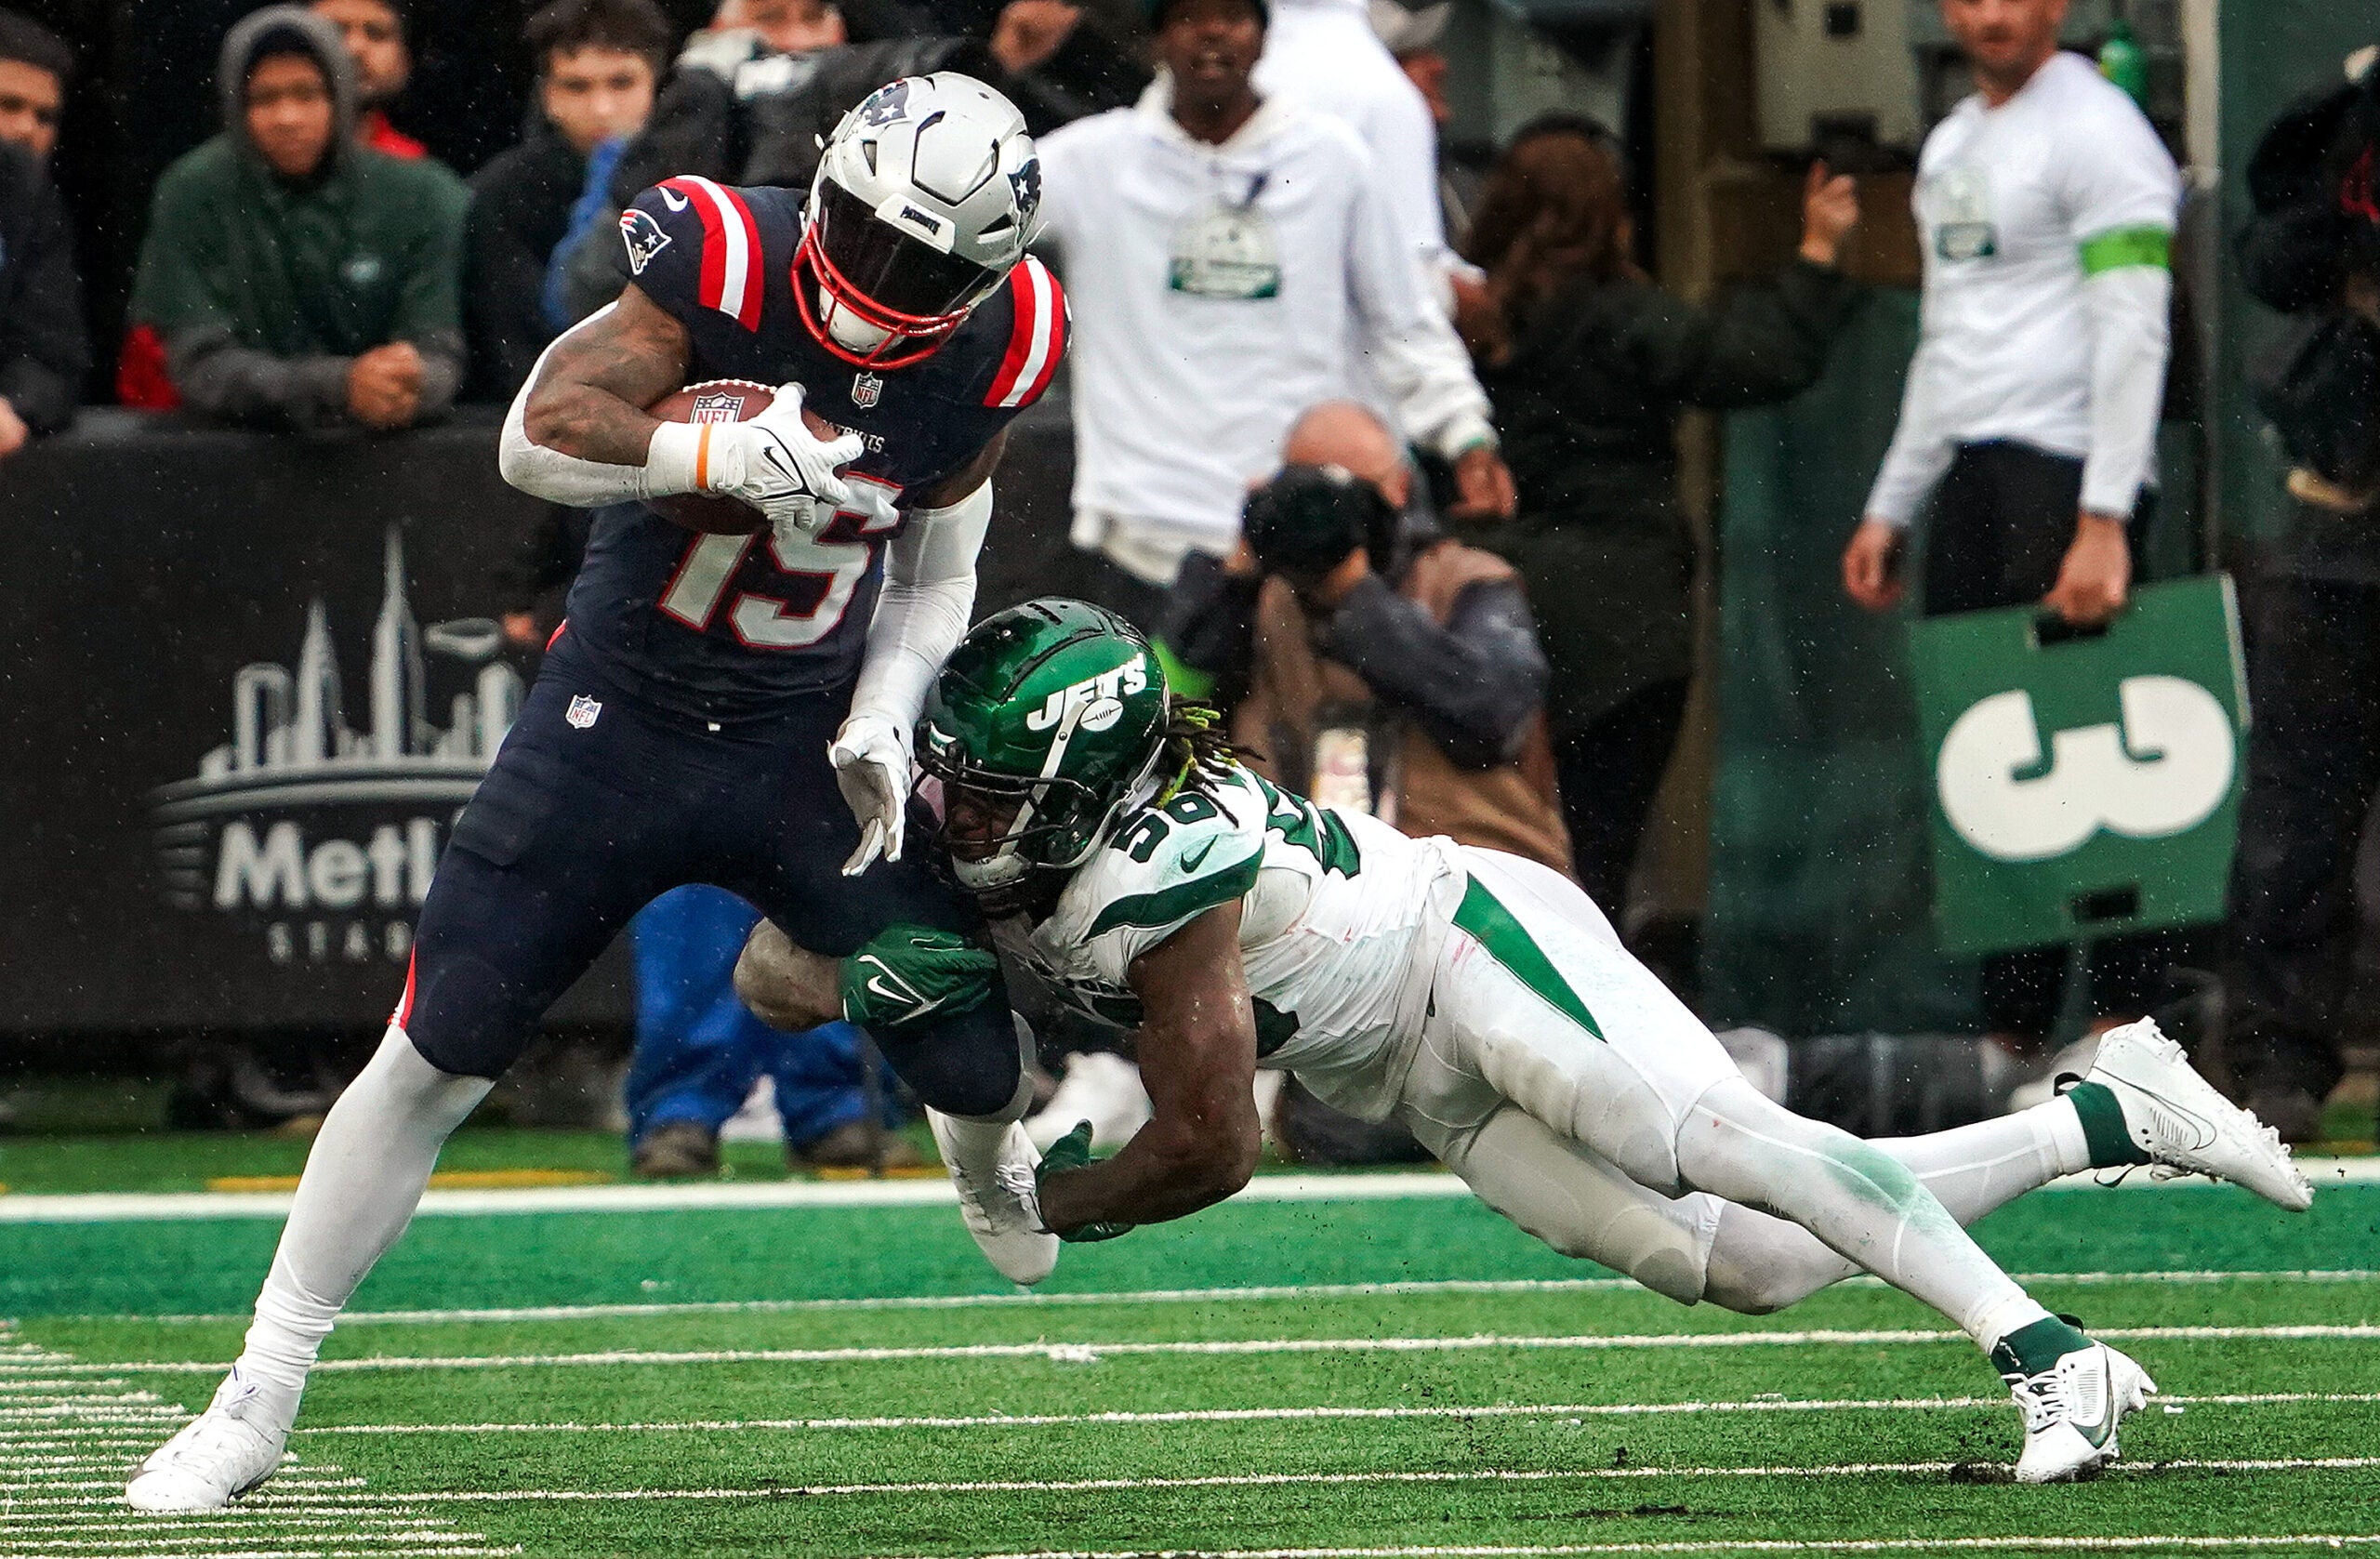 New England Patriots running back Ezekiel Elliott fights for extra yardage as he is brought down by New York Jets linebacker Quincy Williams.